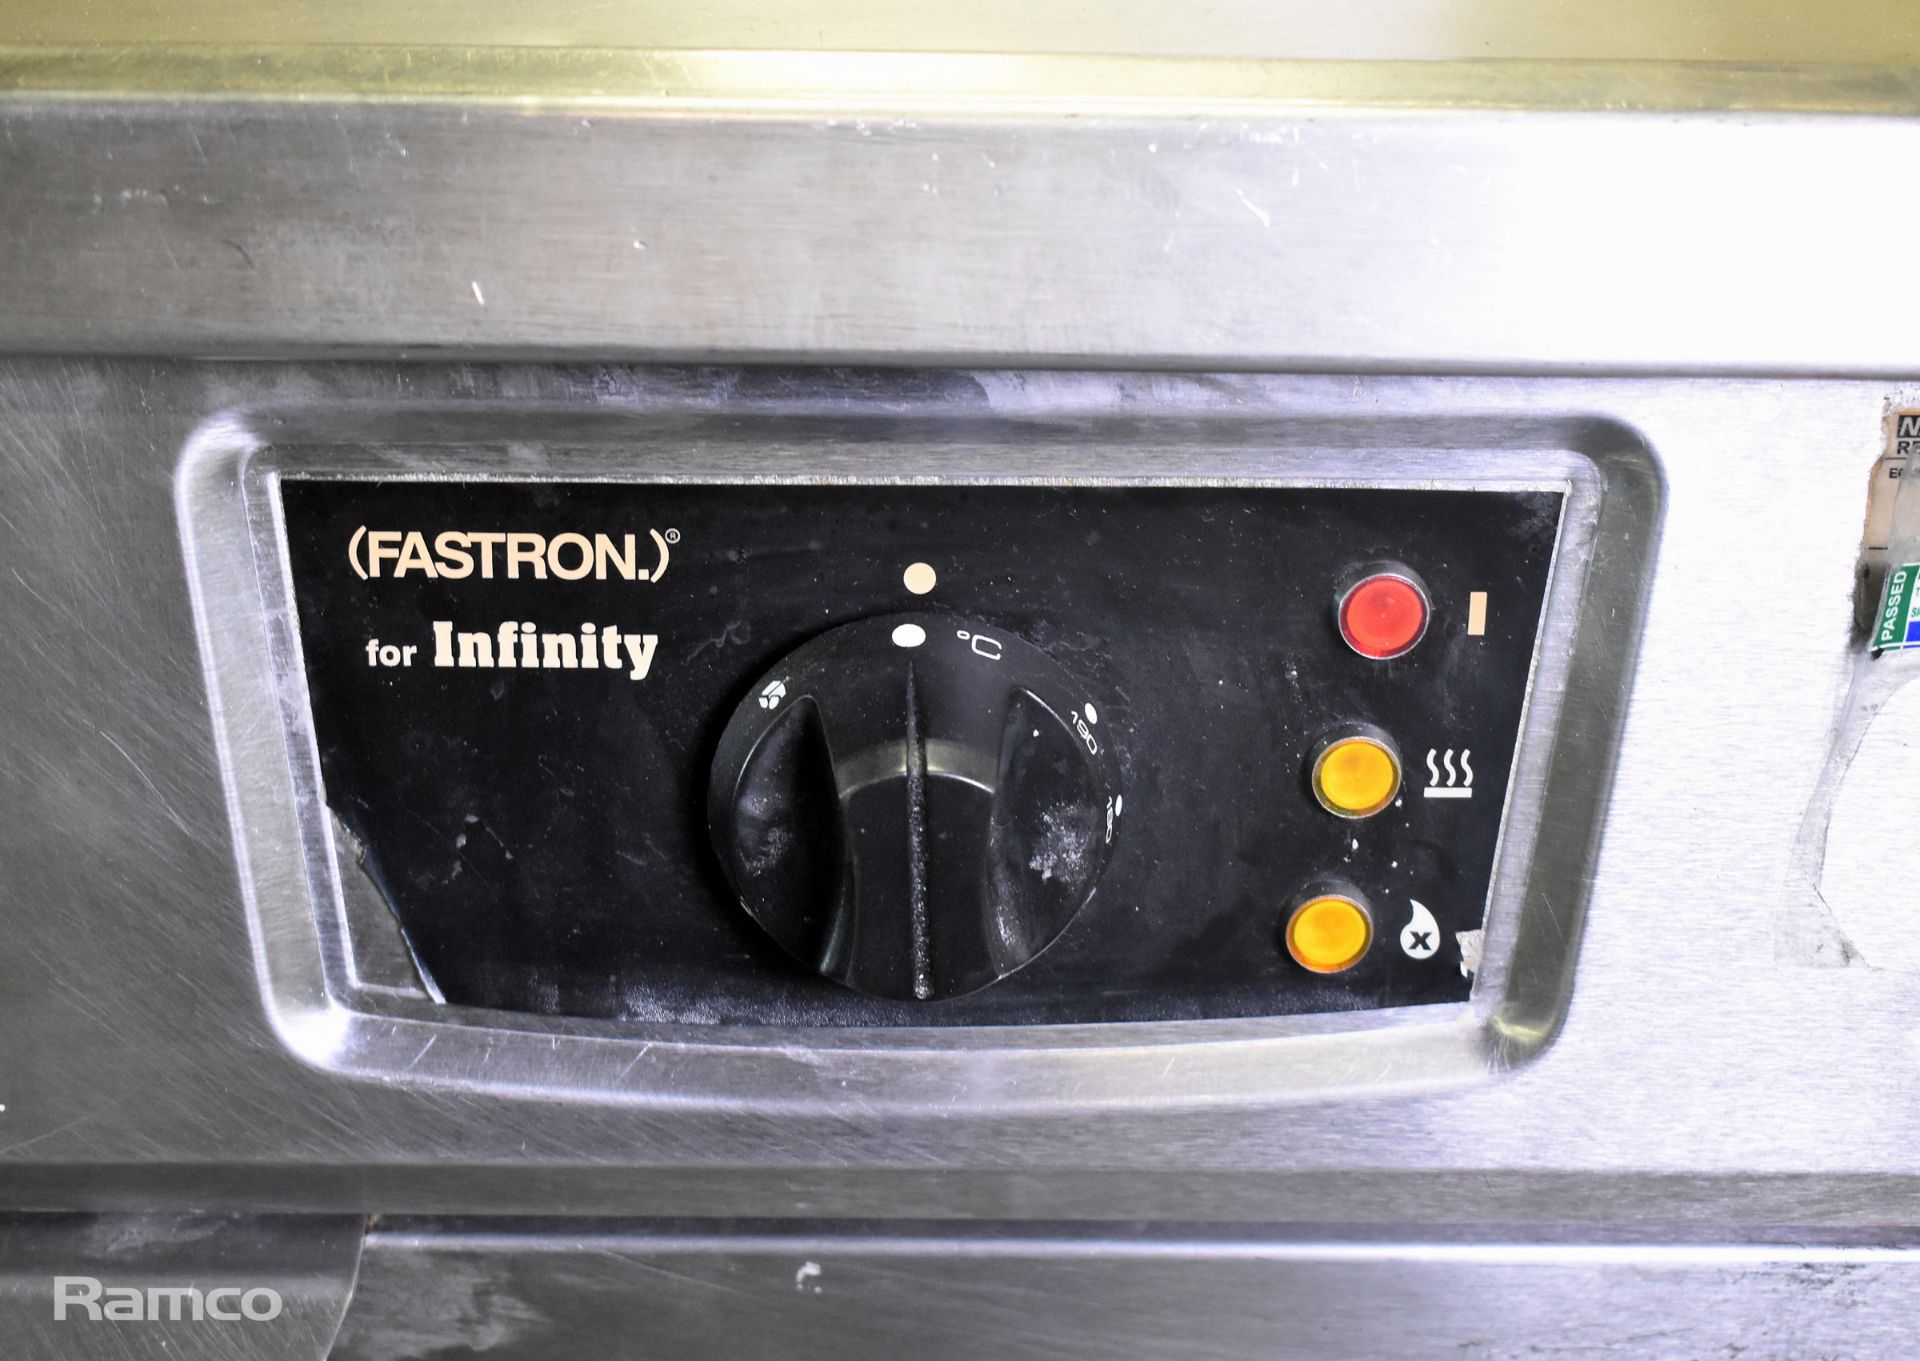 Falcon Fastron Infinity stainless steel single tank gas fryer - W 400 x D 870 x H 1115mm NO BASKETS - Image 2 of 6